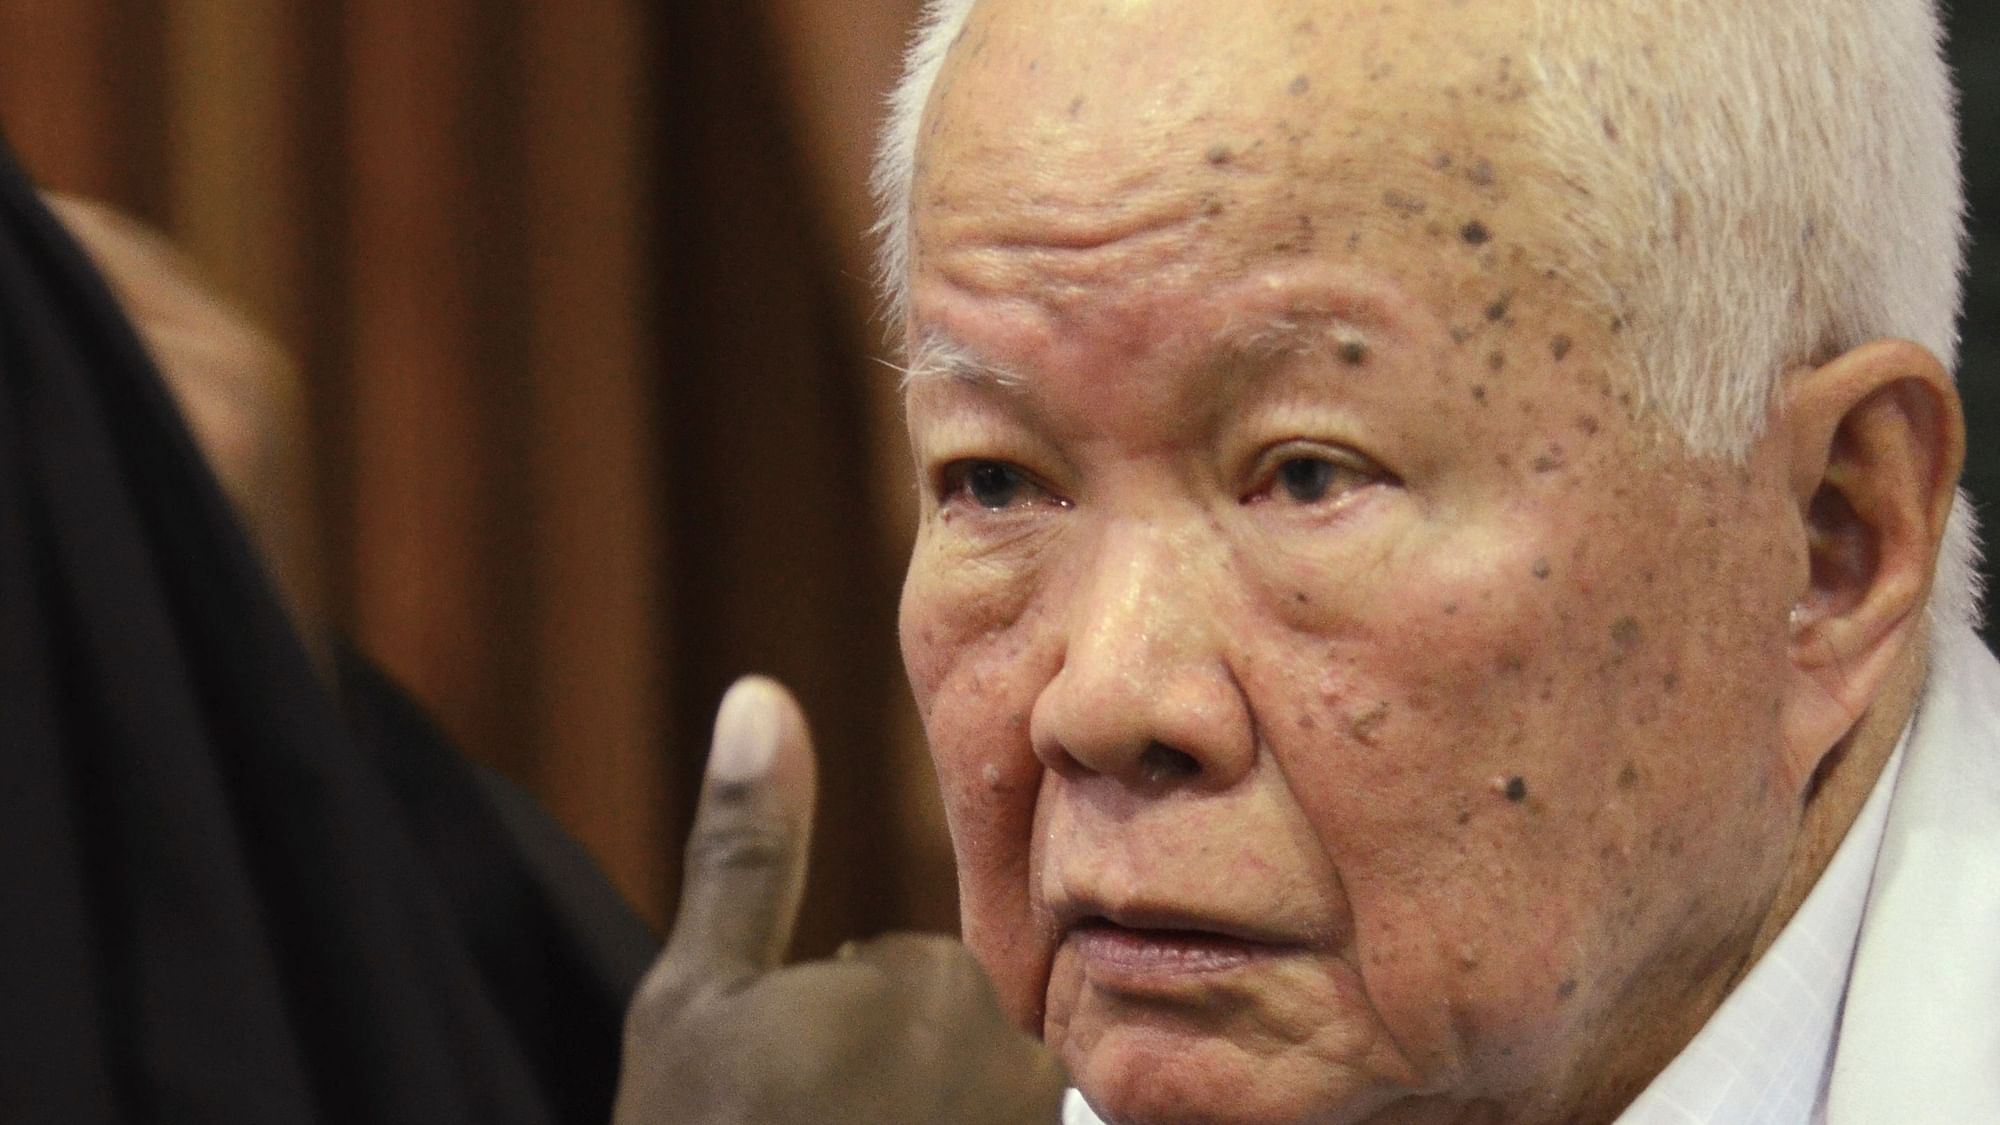 Khieu Samphan, former Khmer Rouge head of state, sits in a court room before a hearing at the UN-backed war crimes tribunal in Phnom Penh, Cambodia on 16 November, 2018.